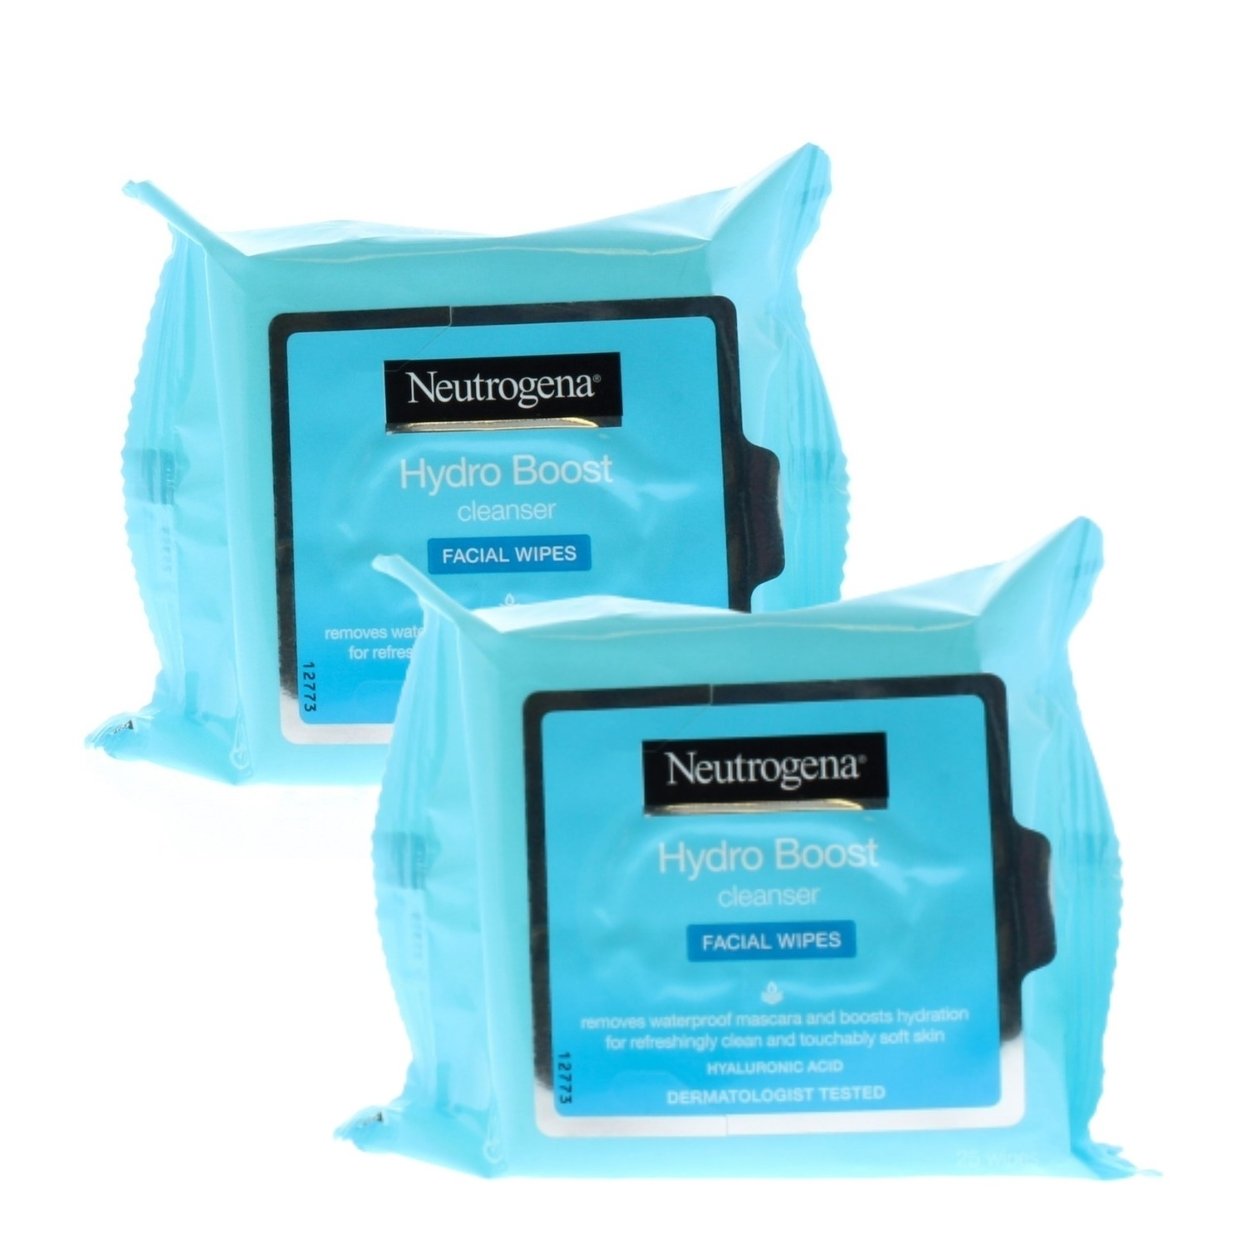 Neutrogena Hydro Boost Cleanser Facial Wipes (2 Packs Of 25 Wipes- Total 50 Wipes)